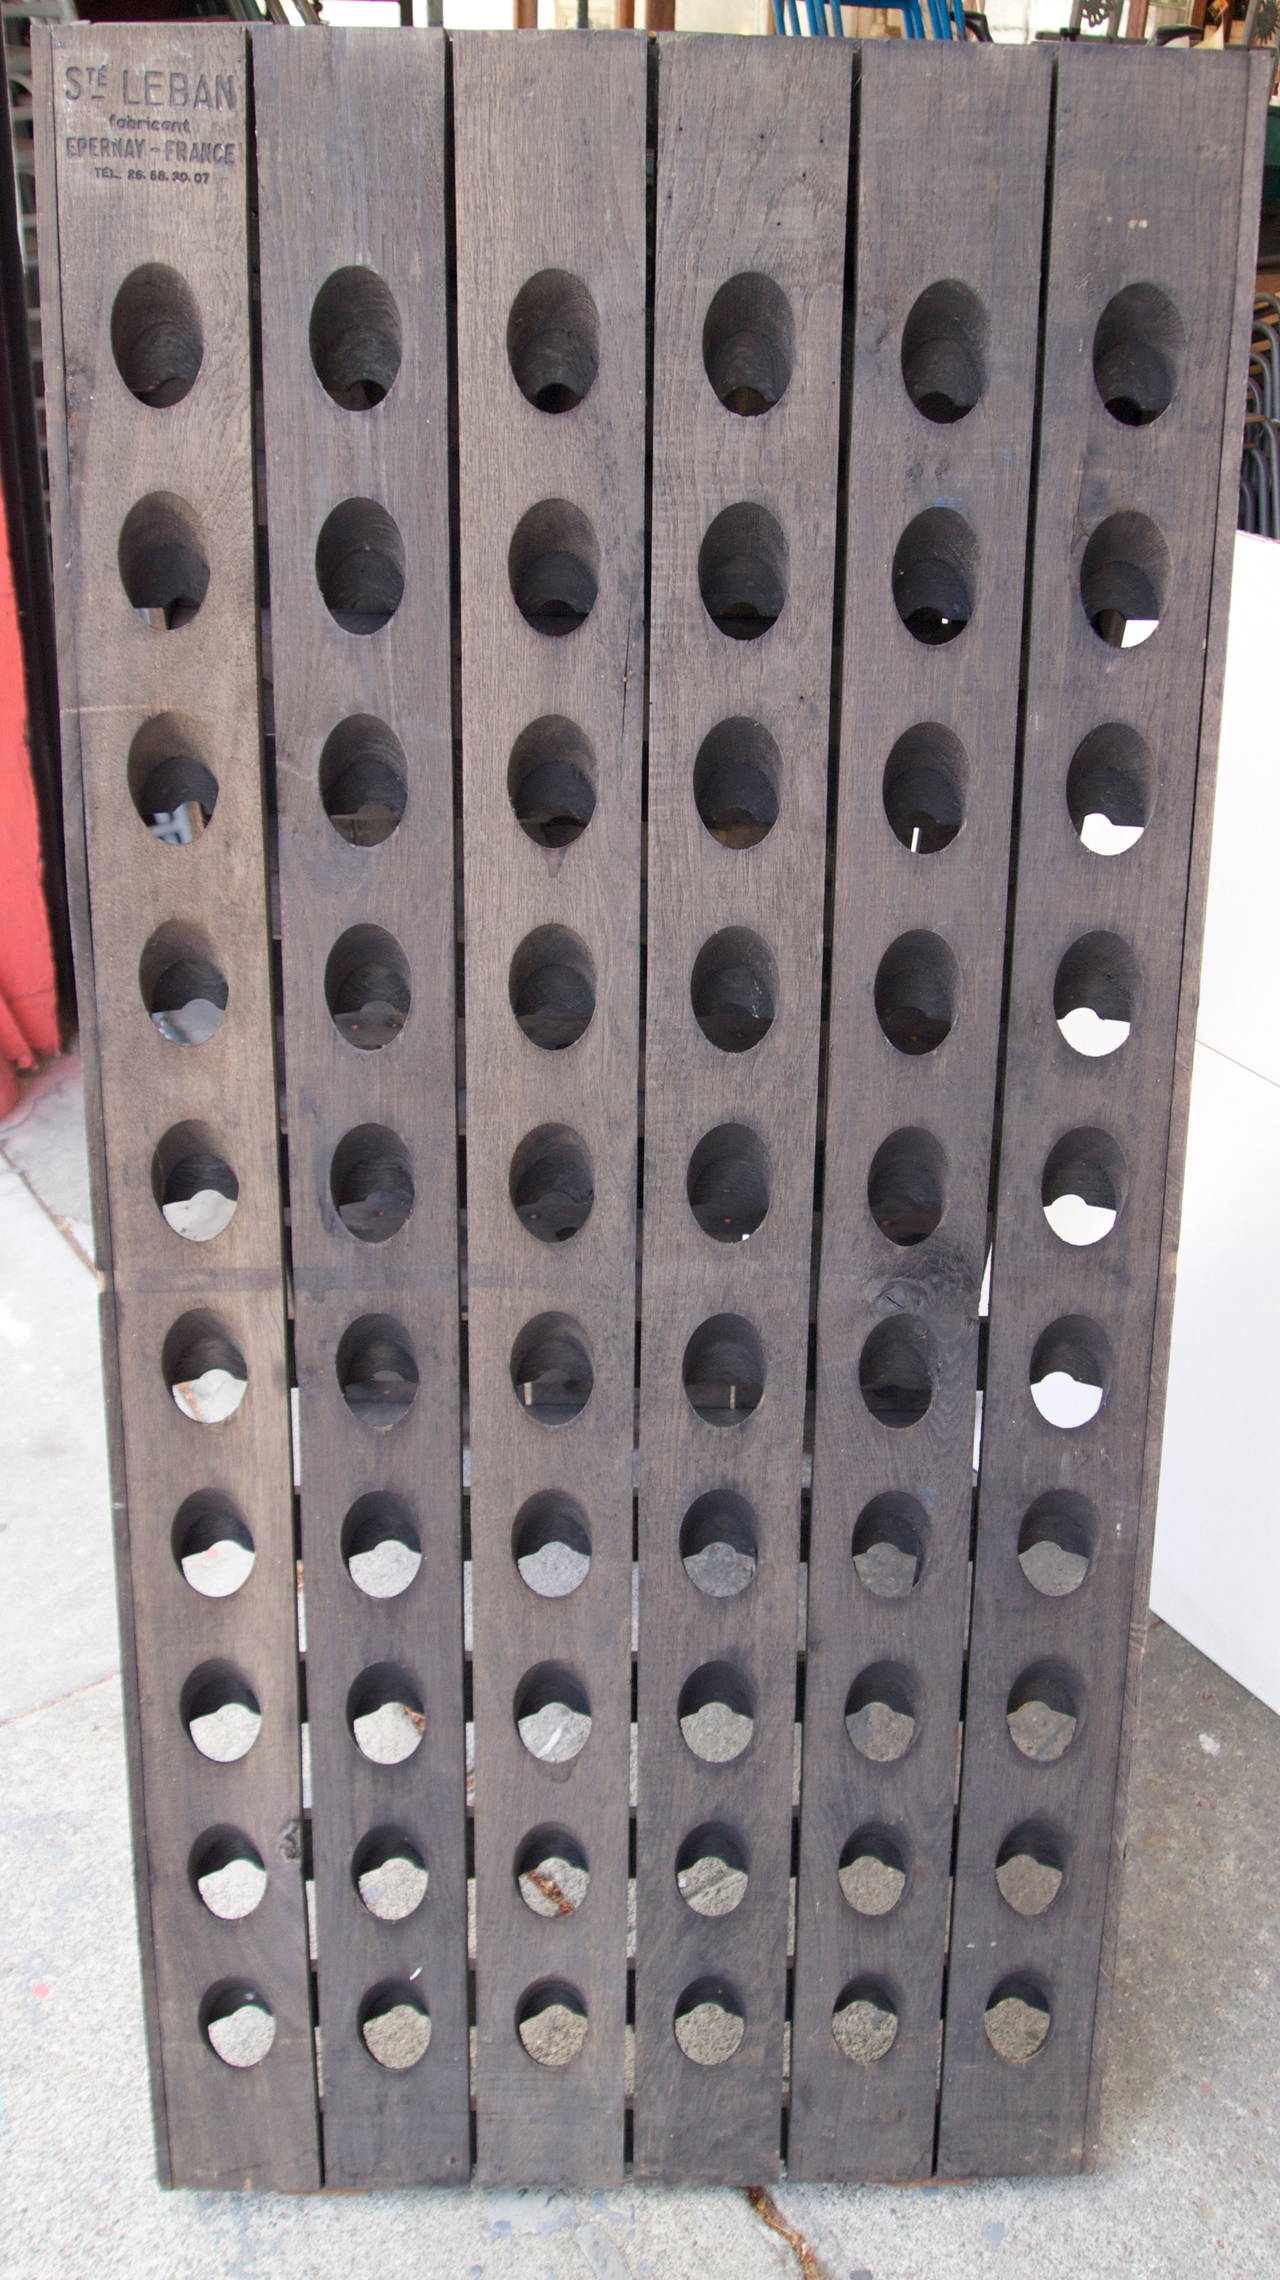 FRENCH OAK RIDDLING RACK BY Ste LEBAN OF EPERNAY FRANCE IN SUPERB CONDITION, Double sided A-Frame with 120 champagne bottle capacity